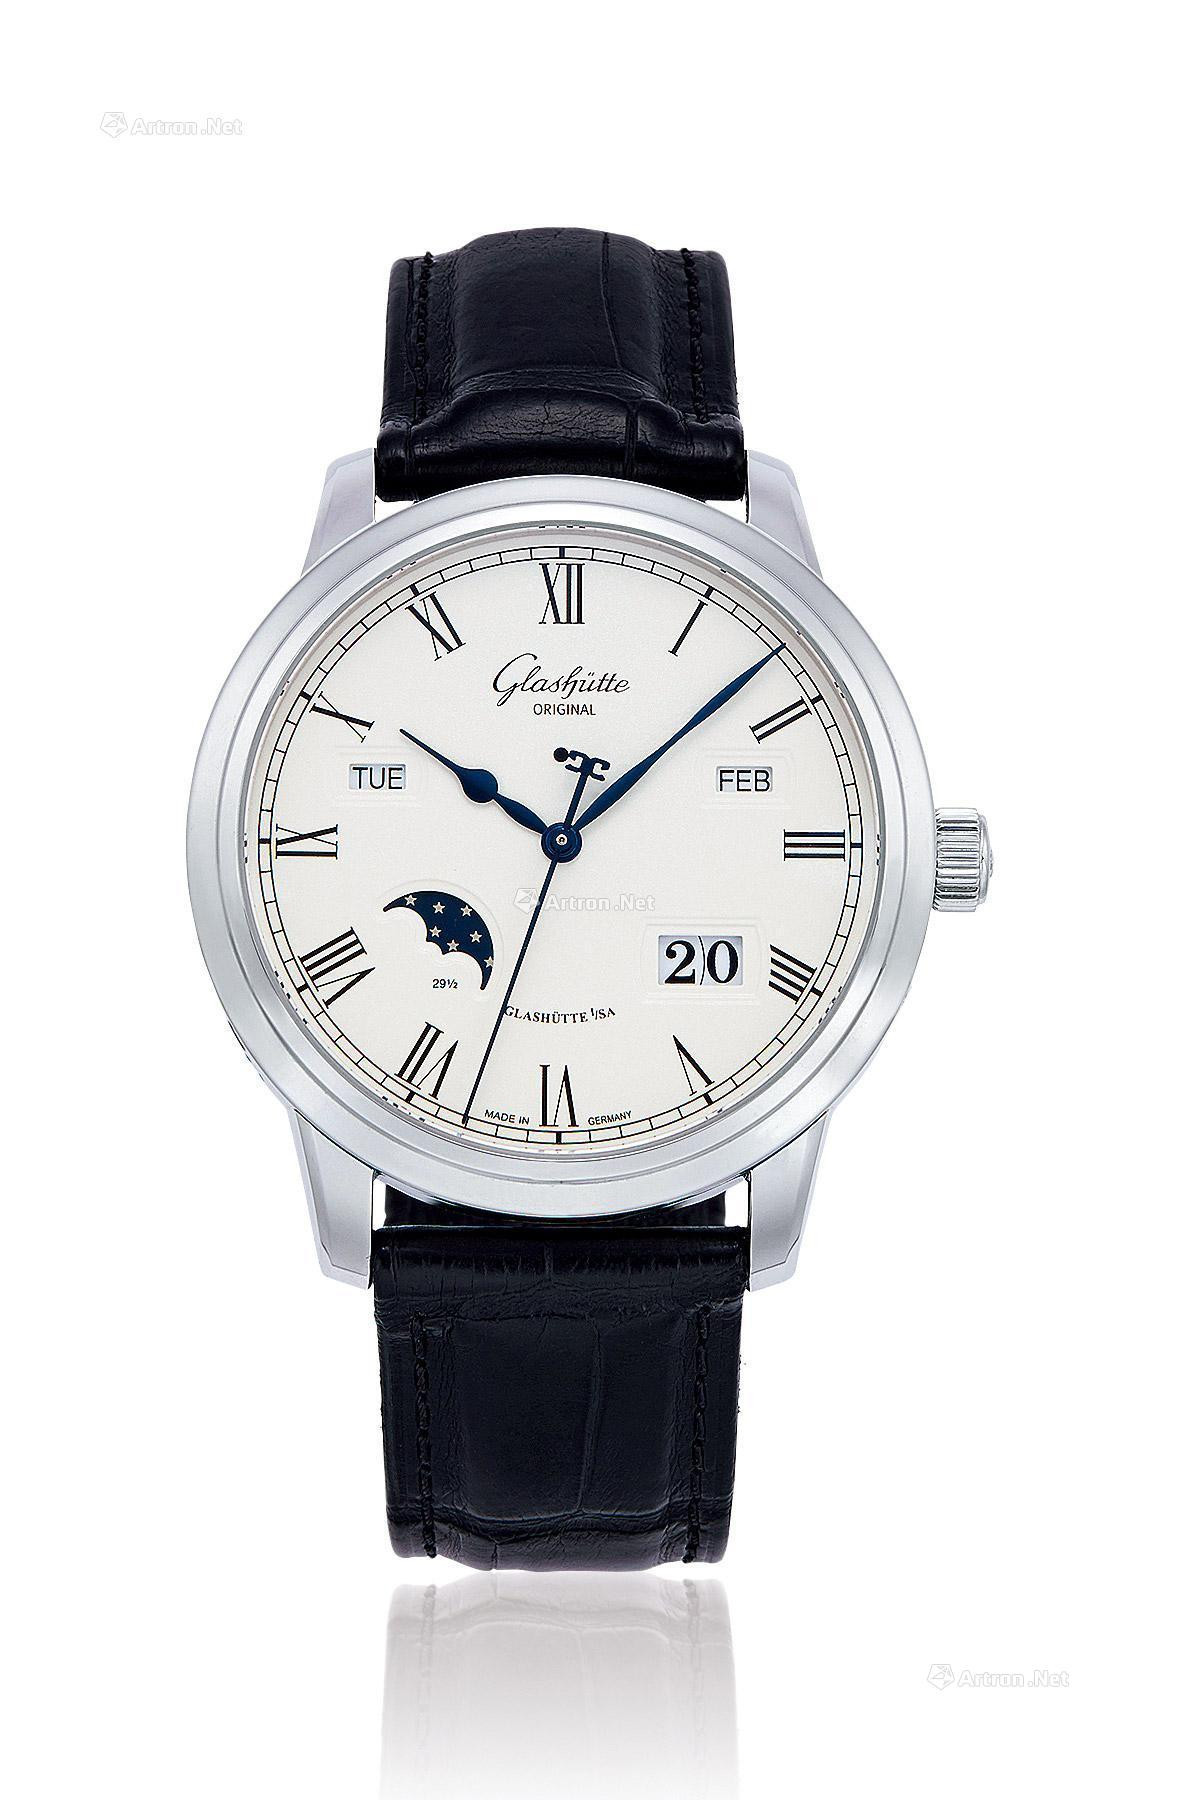 GLASHÜTTE ORIGINAL A STAINLESS STEEL PERPETUAL CALENDAR AUTOMATIC WRISTWATCH WITH MOON-PHASE INDICATION